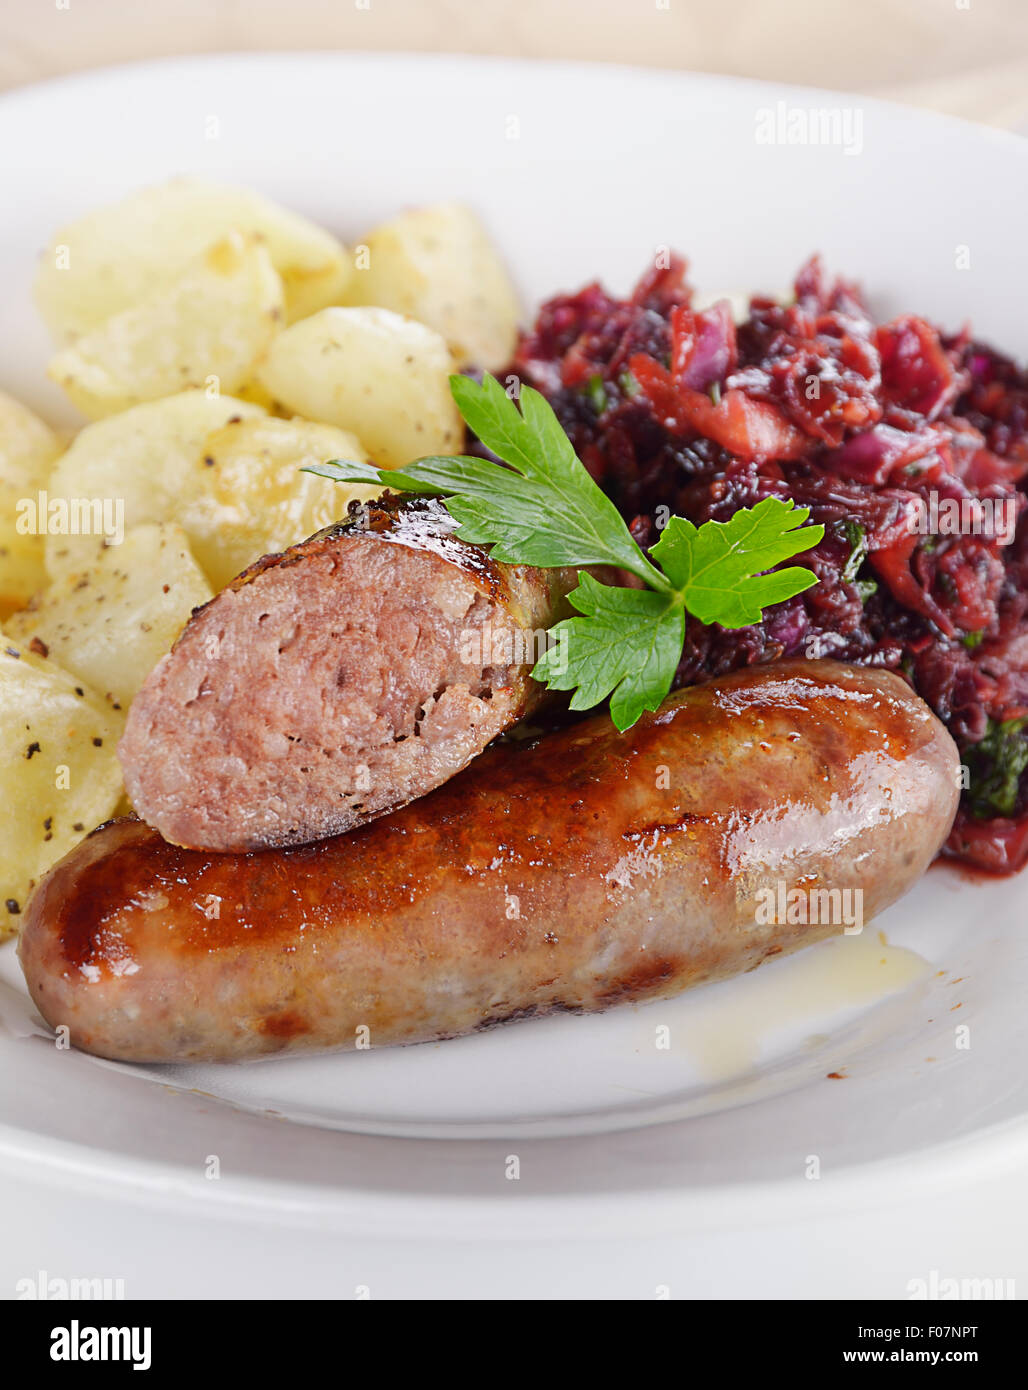 Bratwurst with Red Cabbage and Potatoes Stock Photo